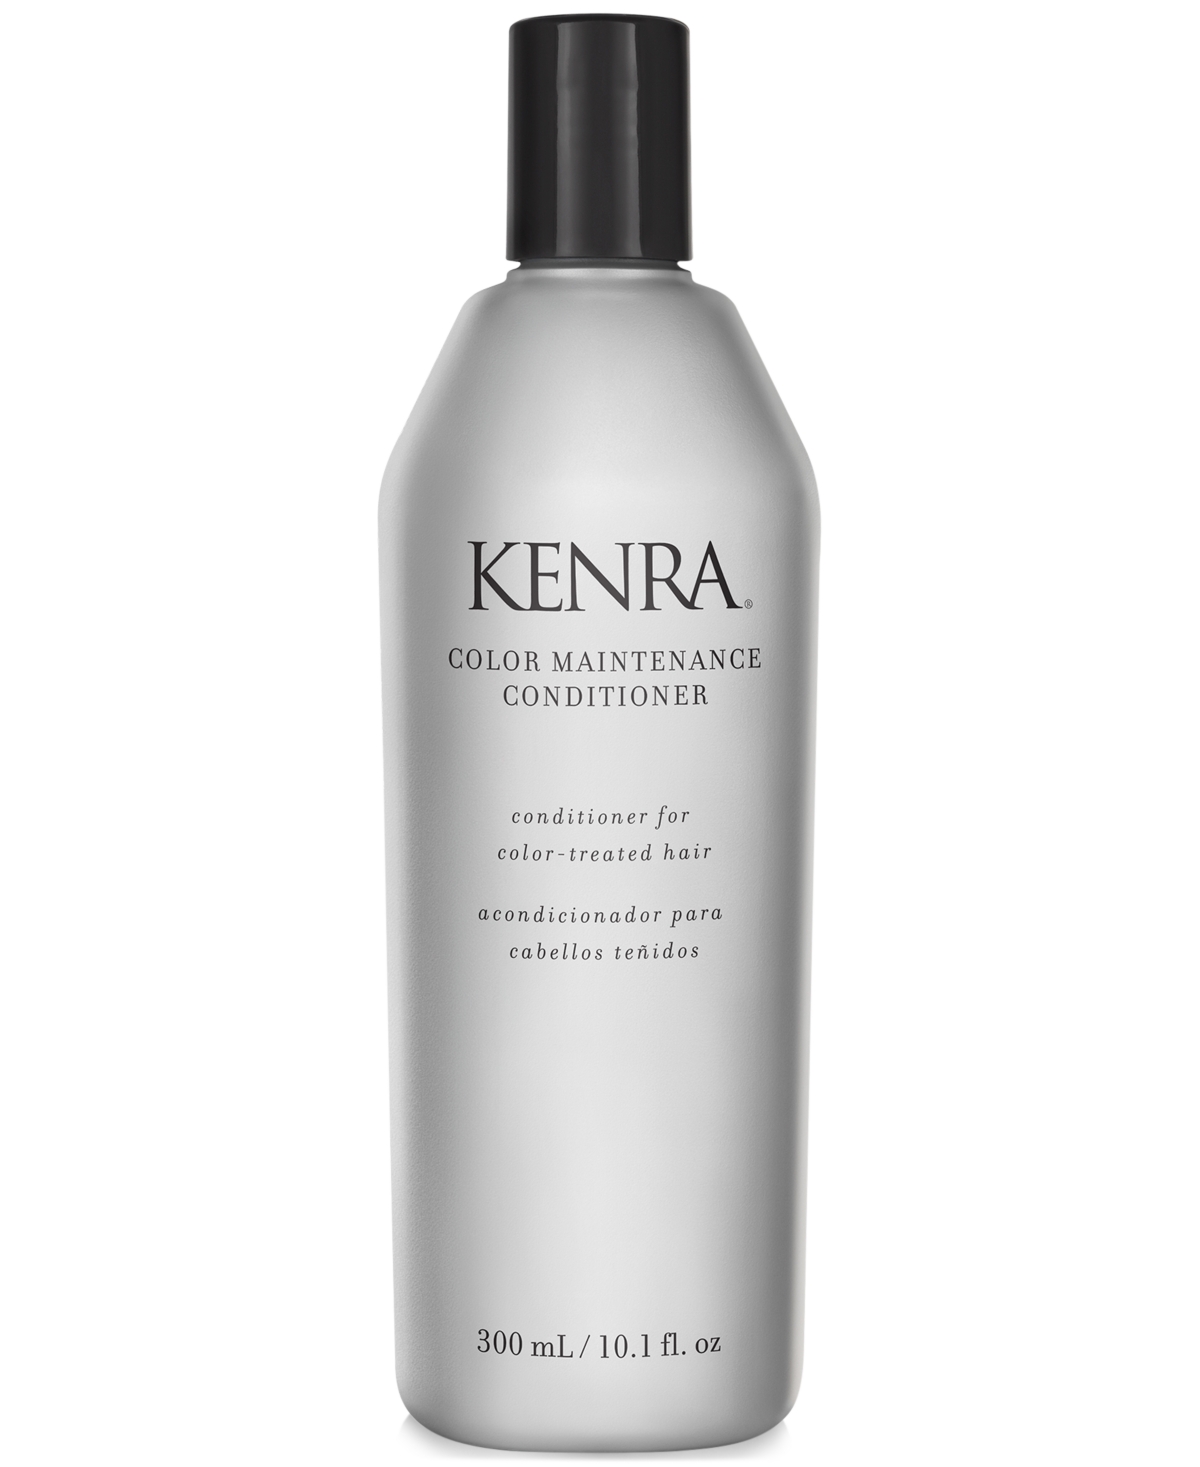 UPC 014926139102 product image for Kenra Professional Color Maintenance Conditioner, 10.1-oz, from Purebeauty Salon | upcitemdb.com